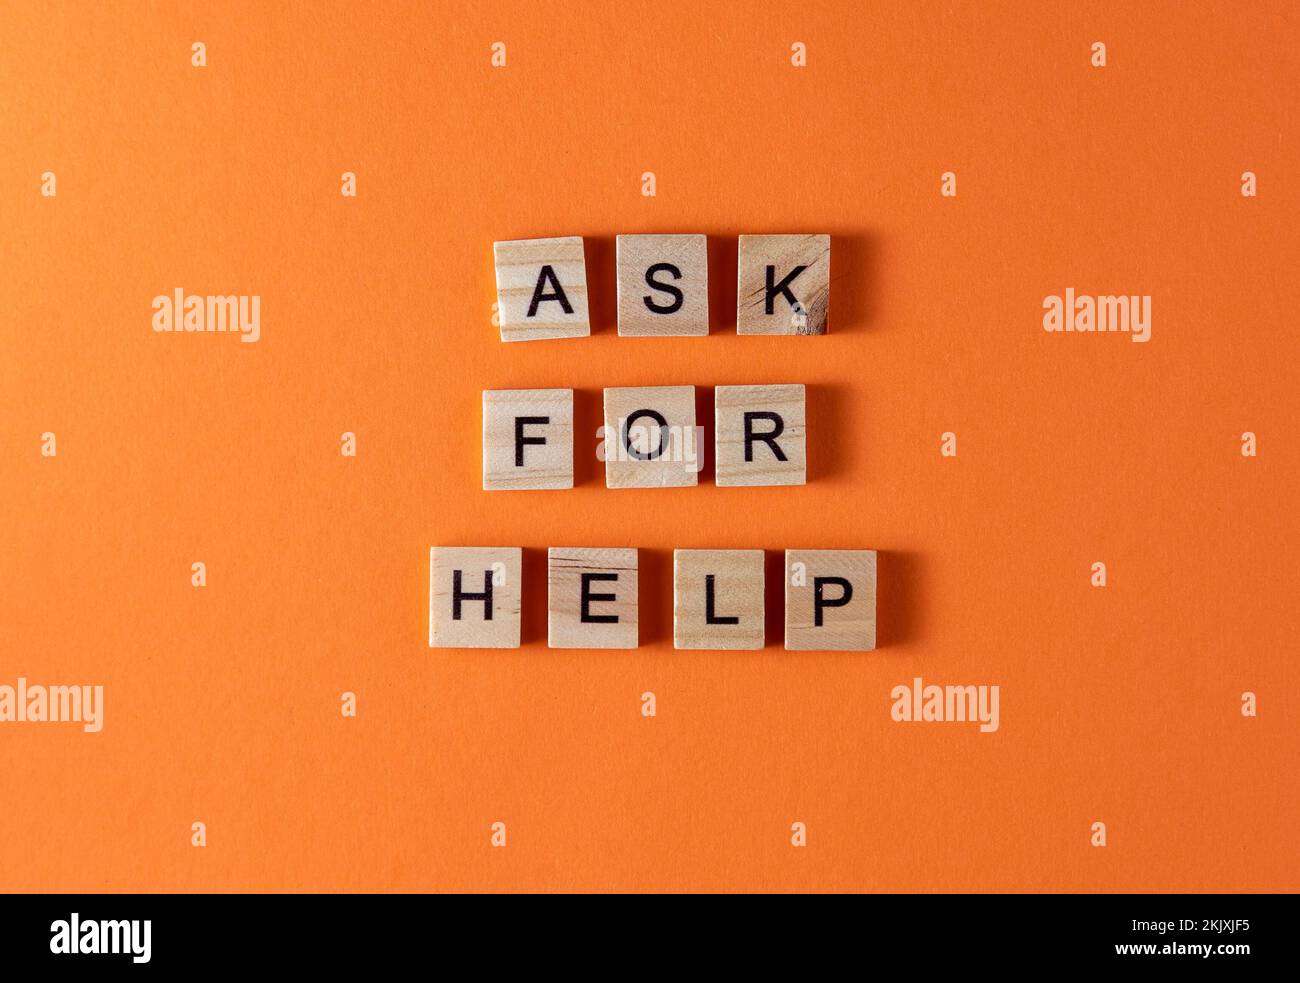 Ask for help word phrase in wooden letters. Motivation and slogan. Orange background. Stock Photo